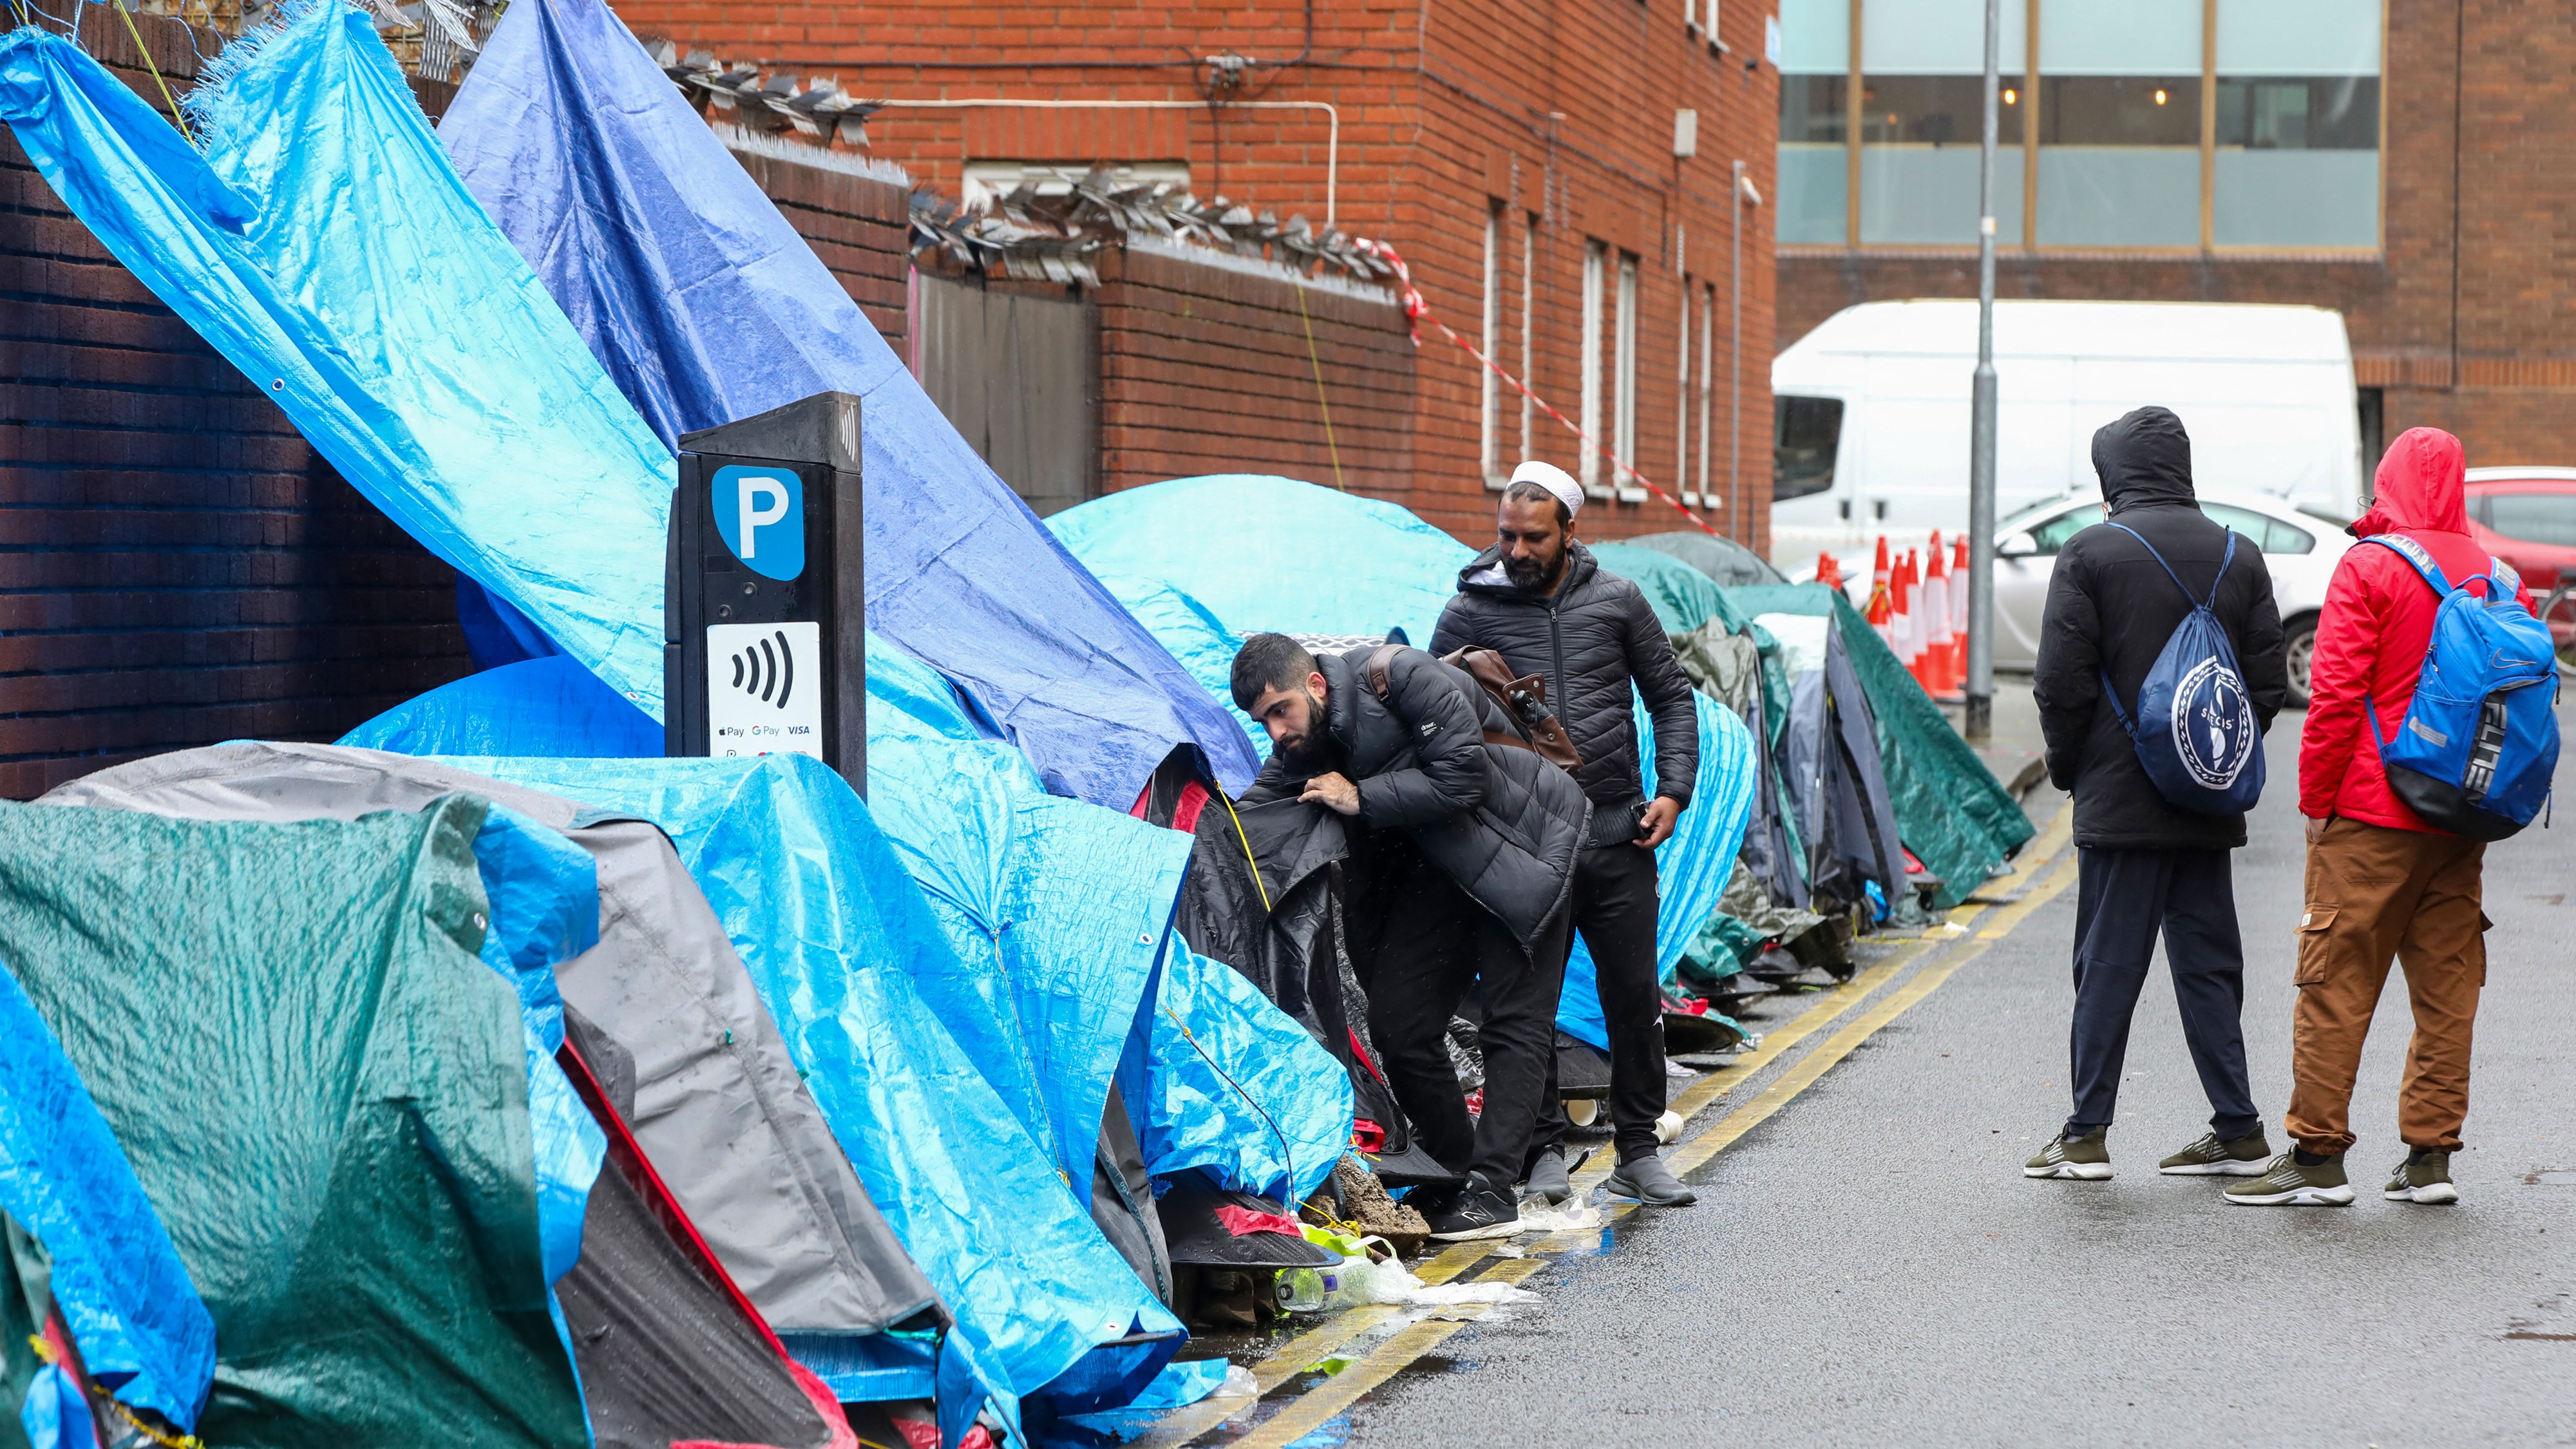 The Irish authorities dismantled a tent village housing more than 200 asylum seekers outside a government office in Dublin